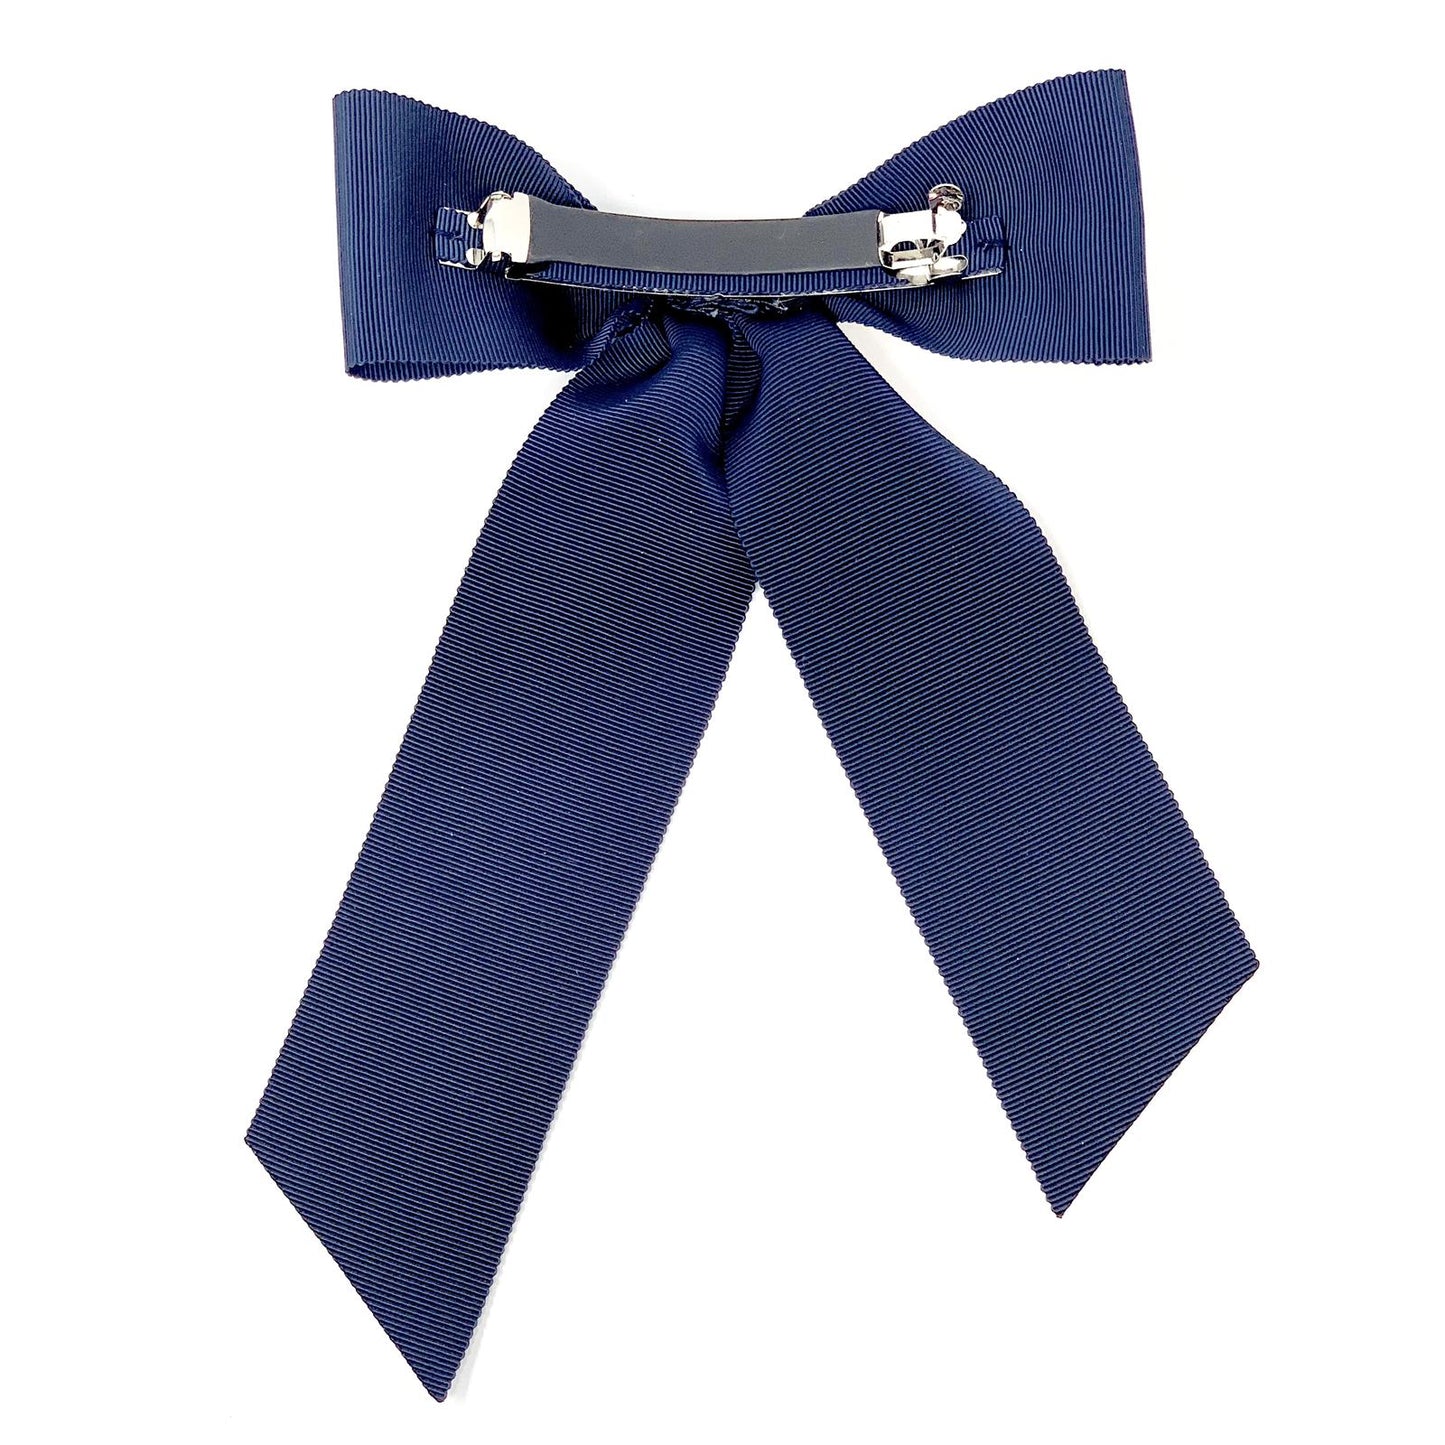 Hair clip with a big bow in navy color